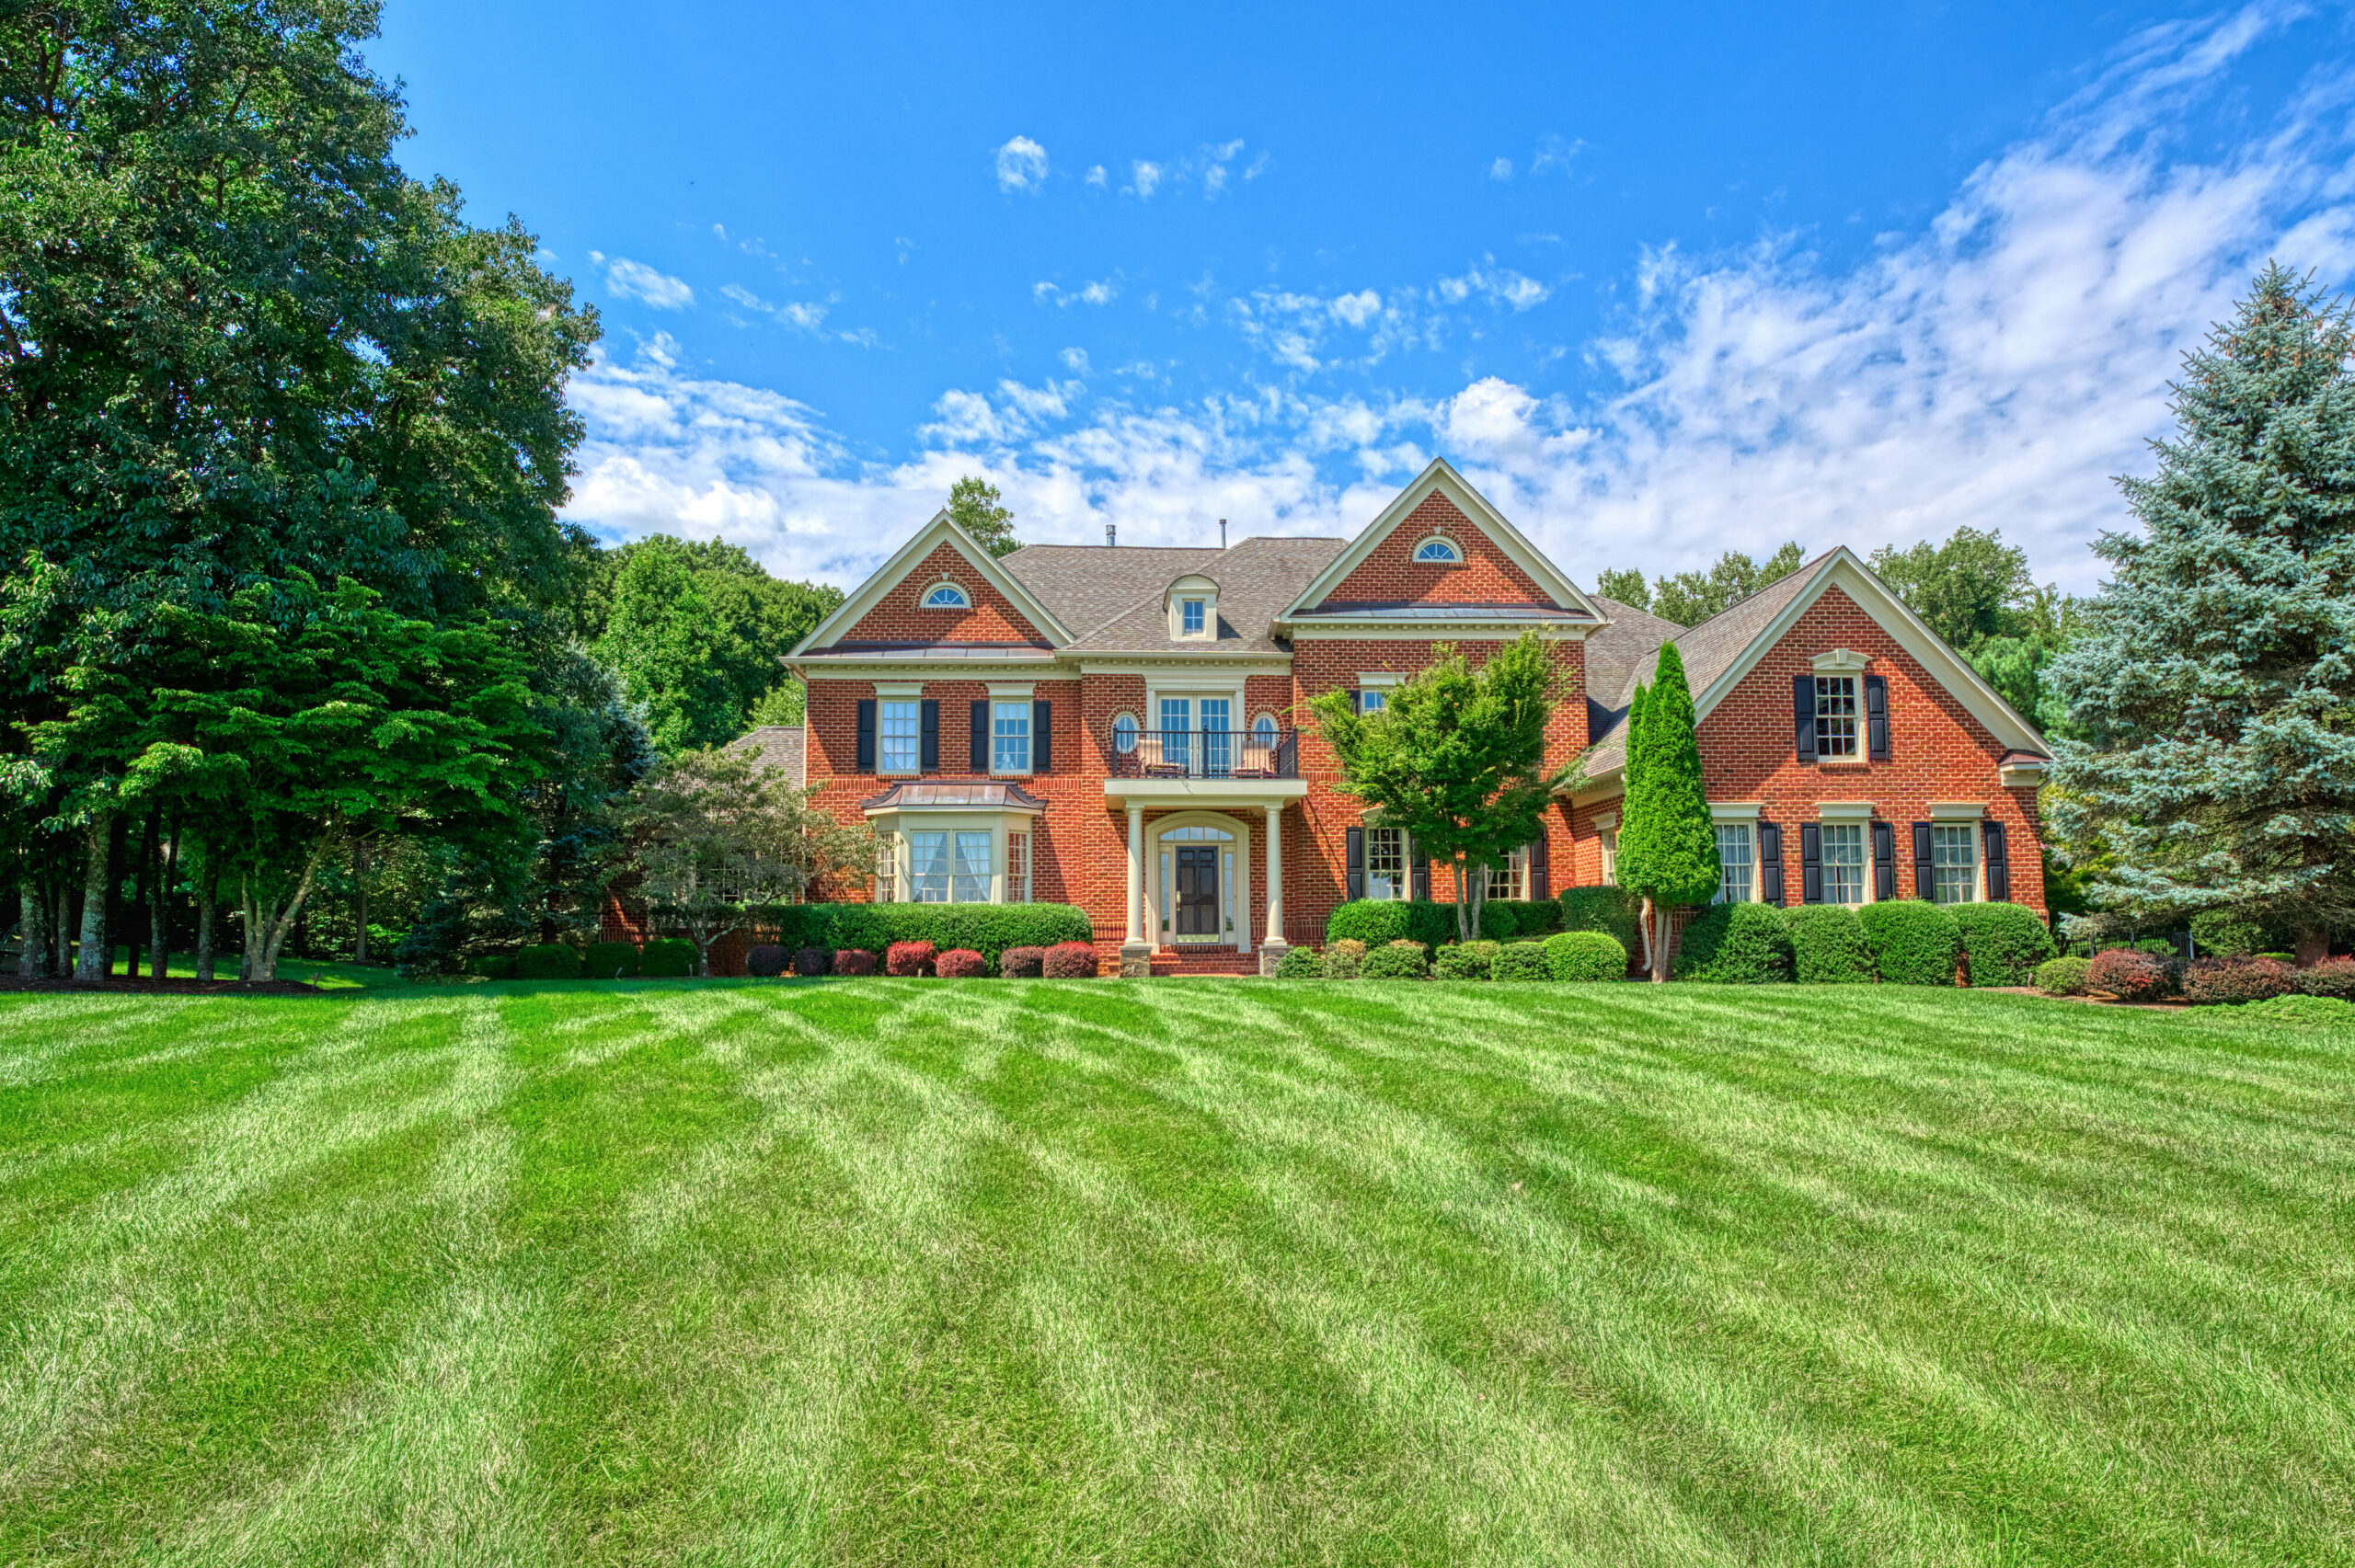 Professional exterior photo of 17087 Bold Venture Drive, Leesburg - showing the large lawn leading up to the red brick stately home